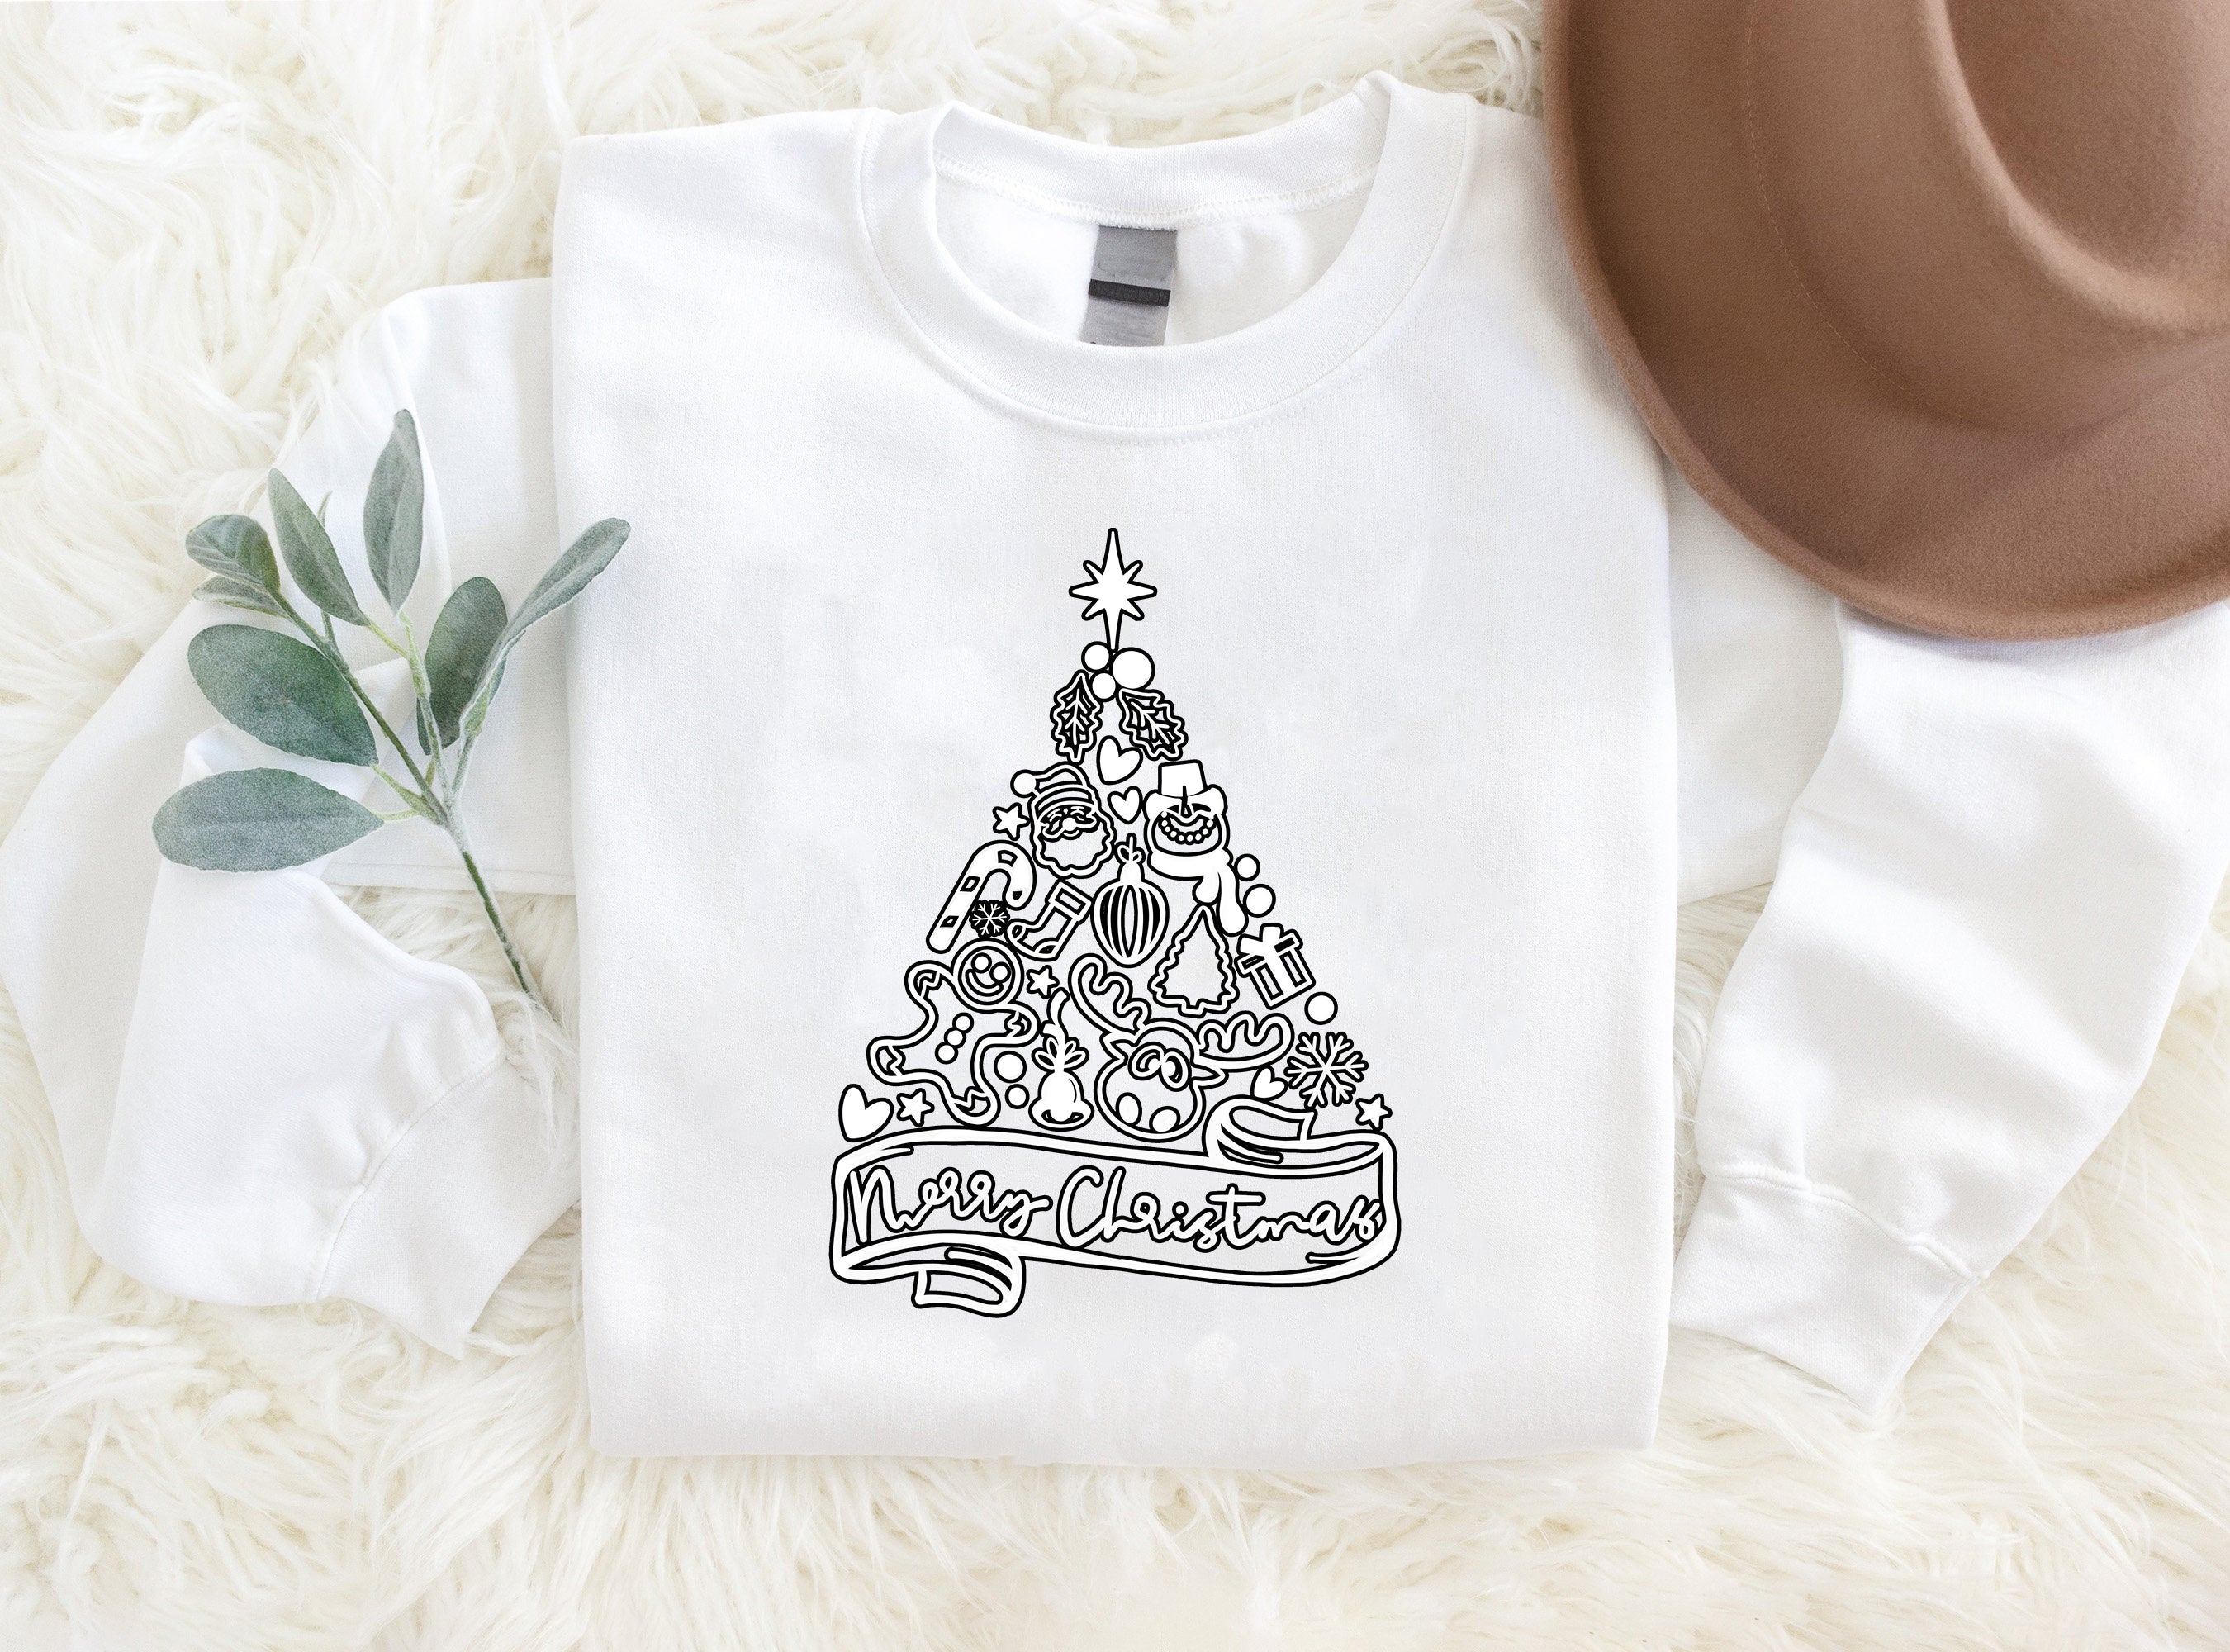 'Merry Chirstmas' And Gift-wrapped Christmas Tree Pattern Family Christmas Matching Pajamas Tops Cute White Long Sleeve Sweatshirts With Dog Bandana